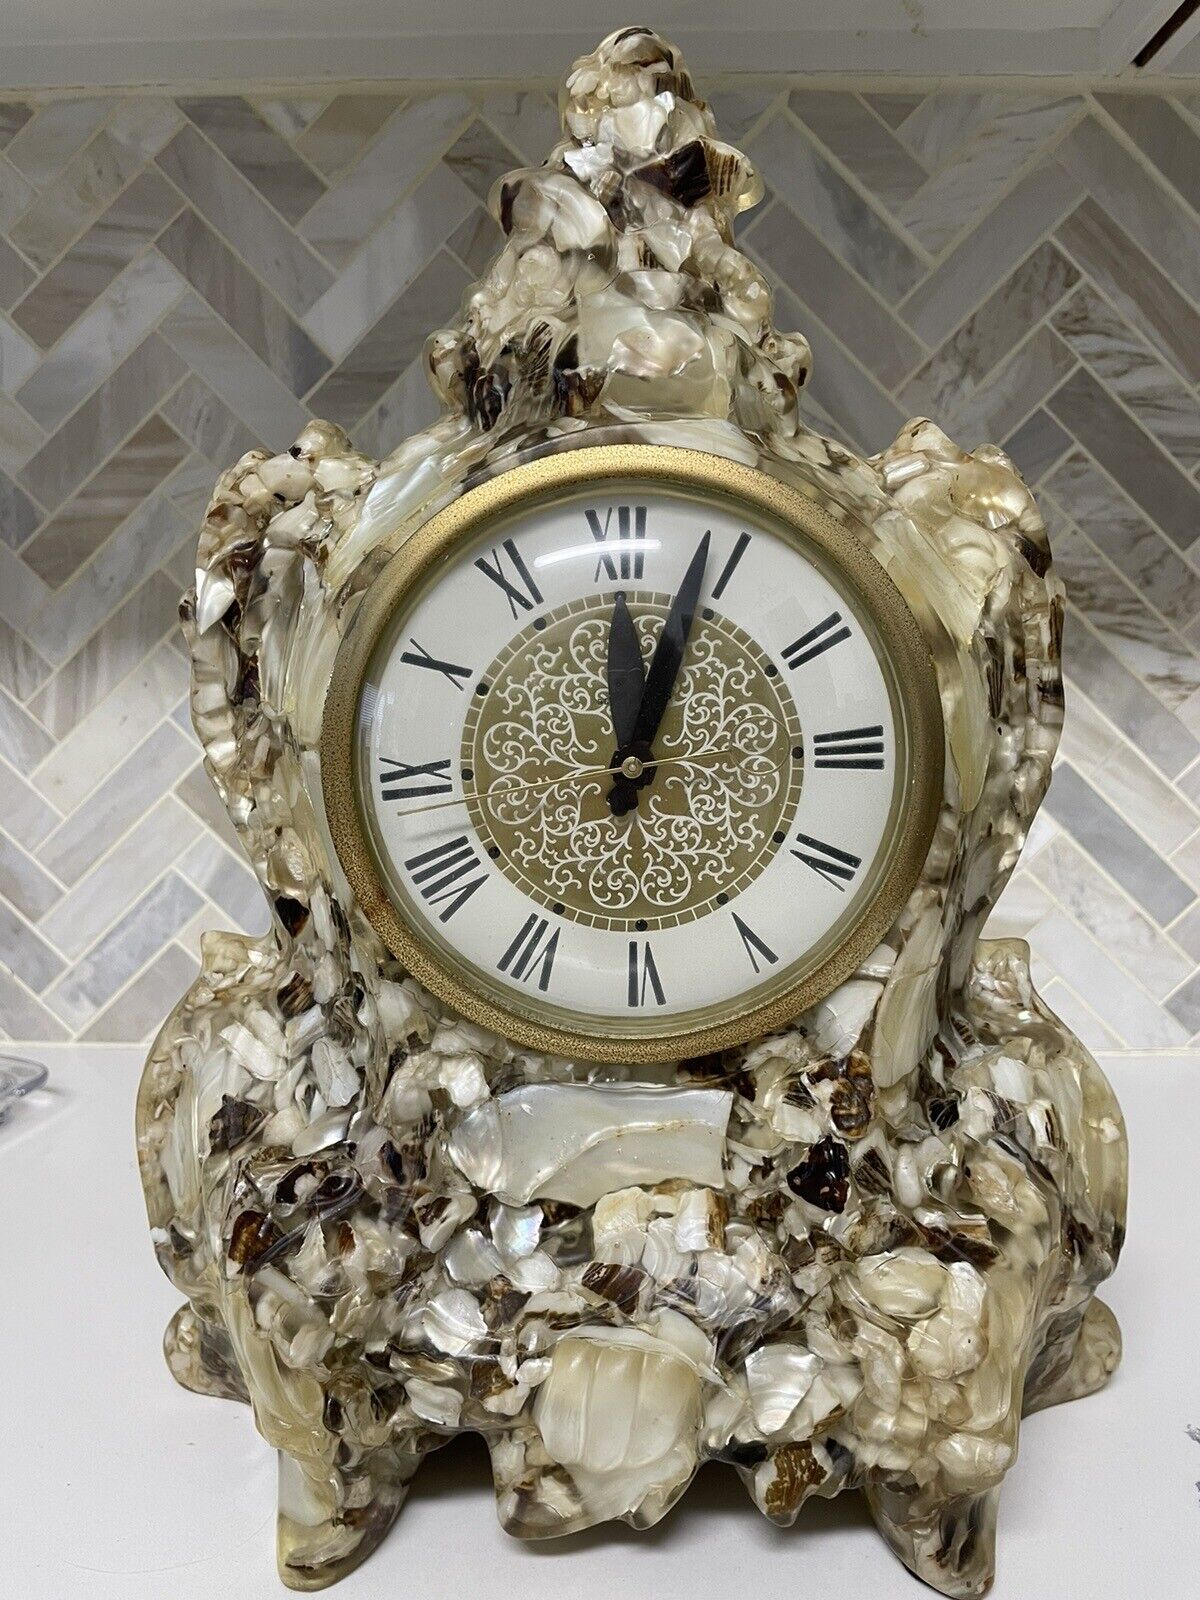 VTG MCM Lanshire Vomit Clock Mother Of PEARL Tennessee Shell Co. USA Works Great